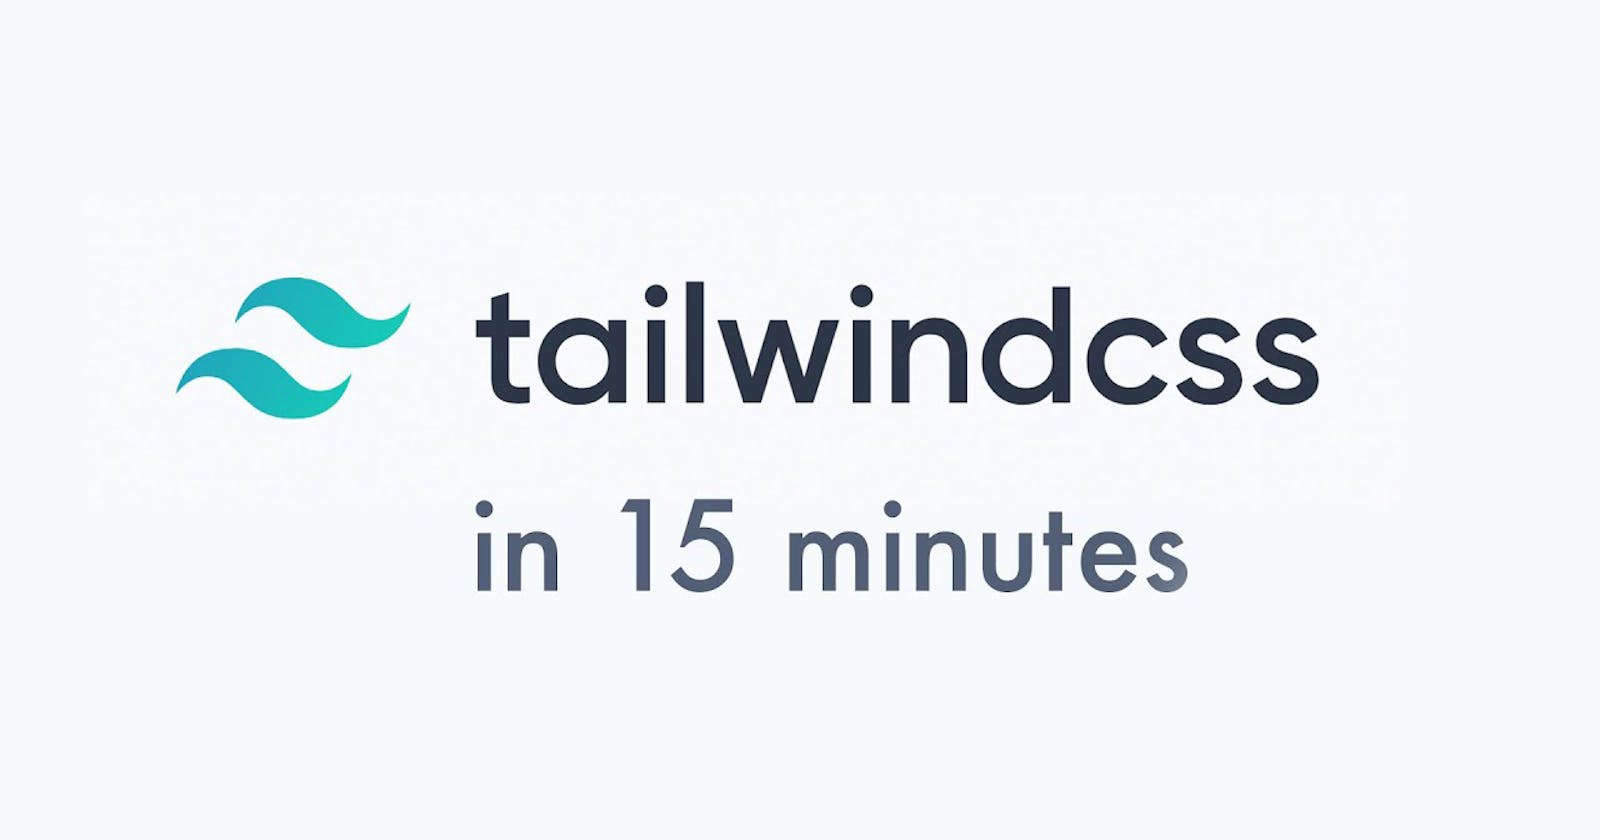 Tailwindcss: Most Powerful and Popular Framework of CSS